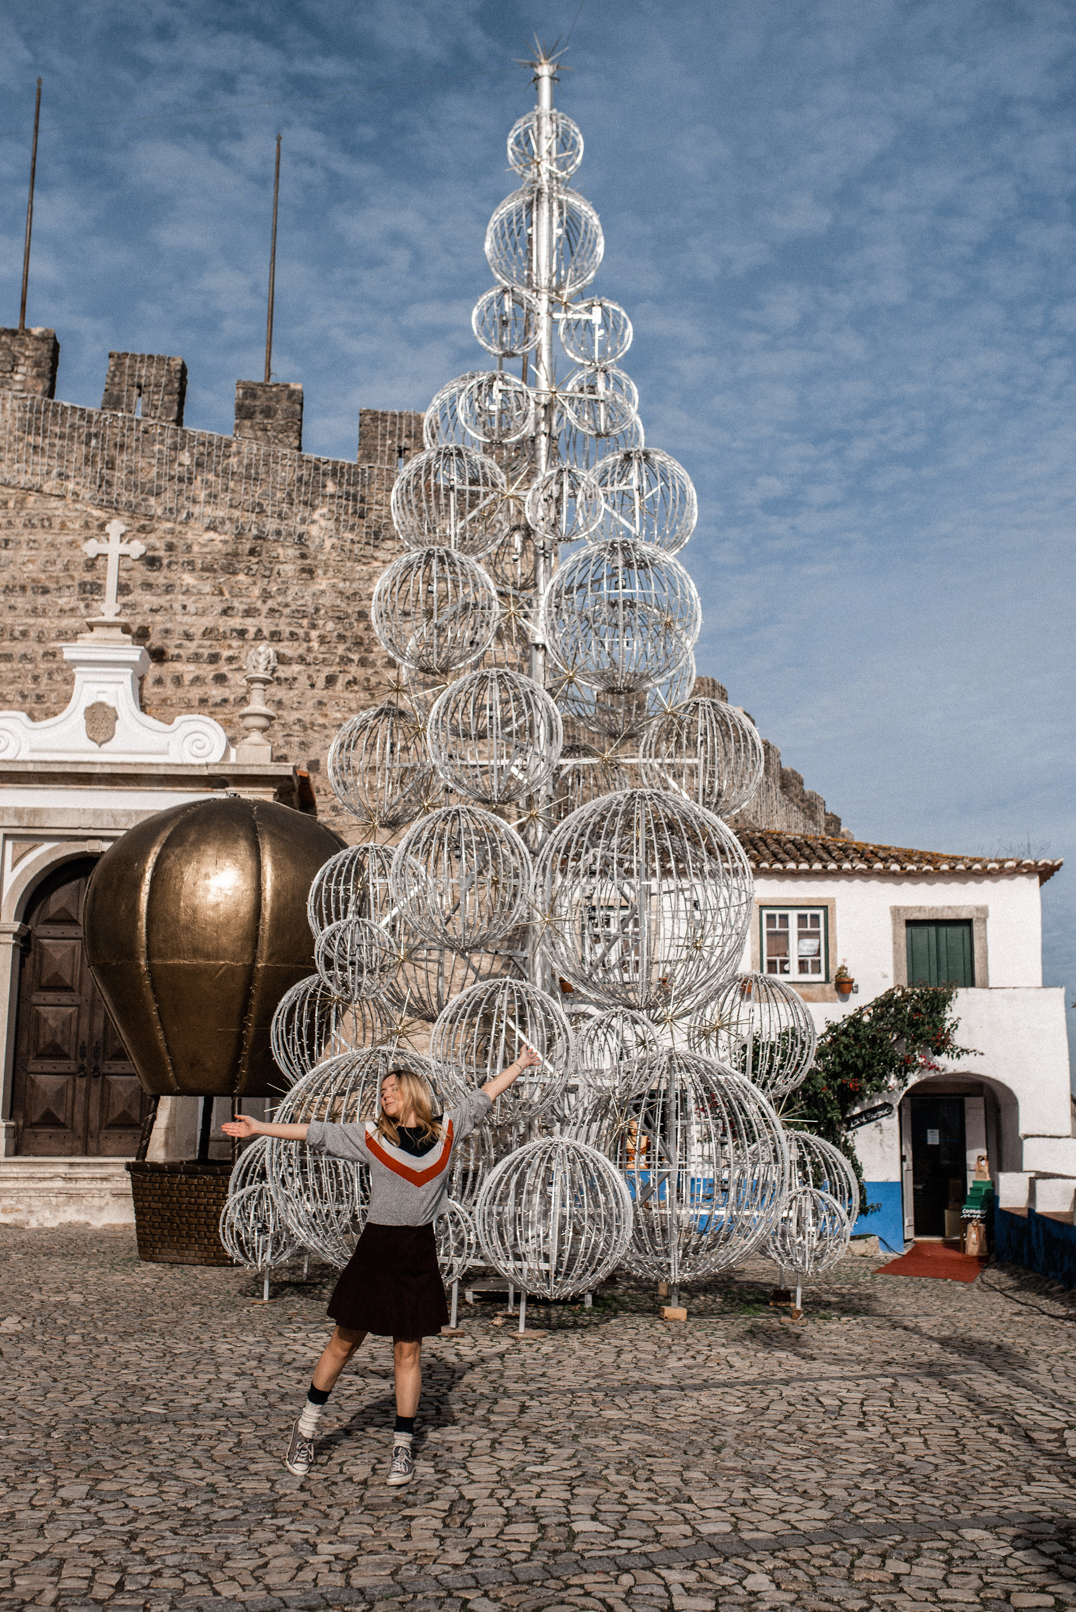 Óbidos Christmas Market - Beth and the Giant Tree 